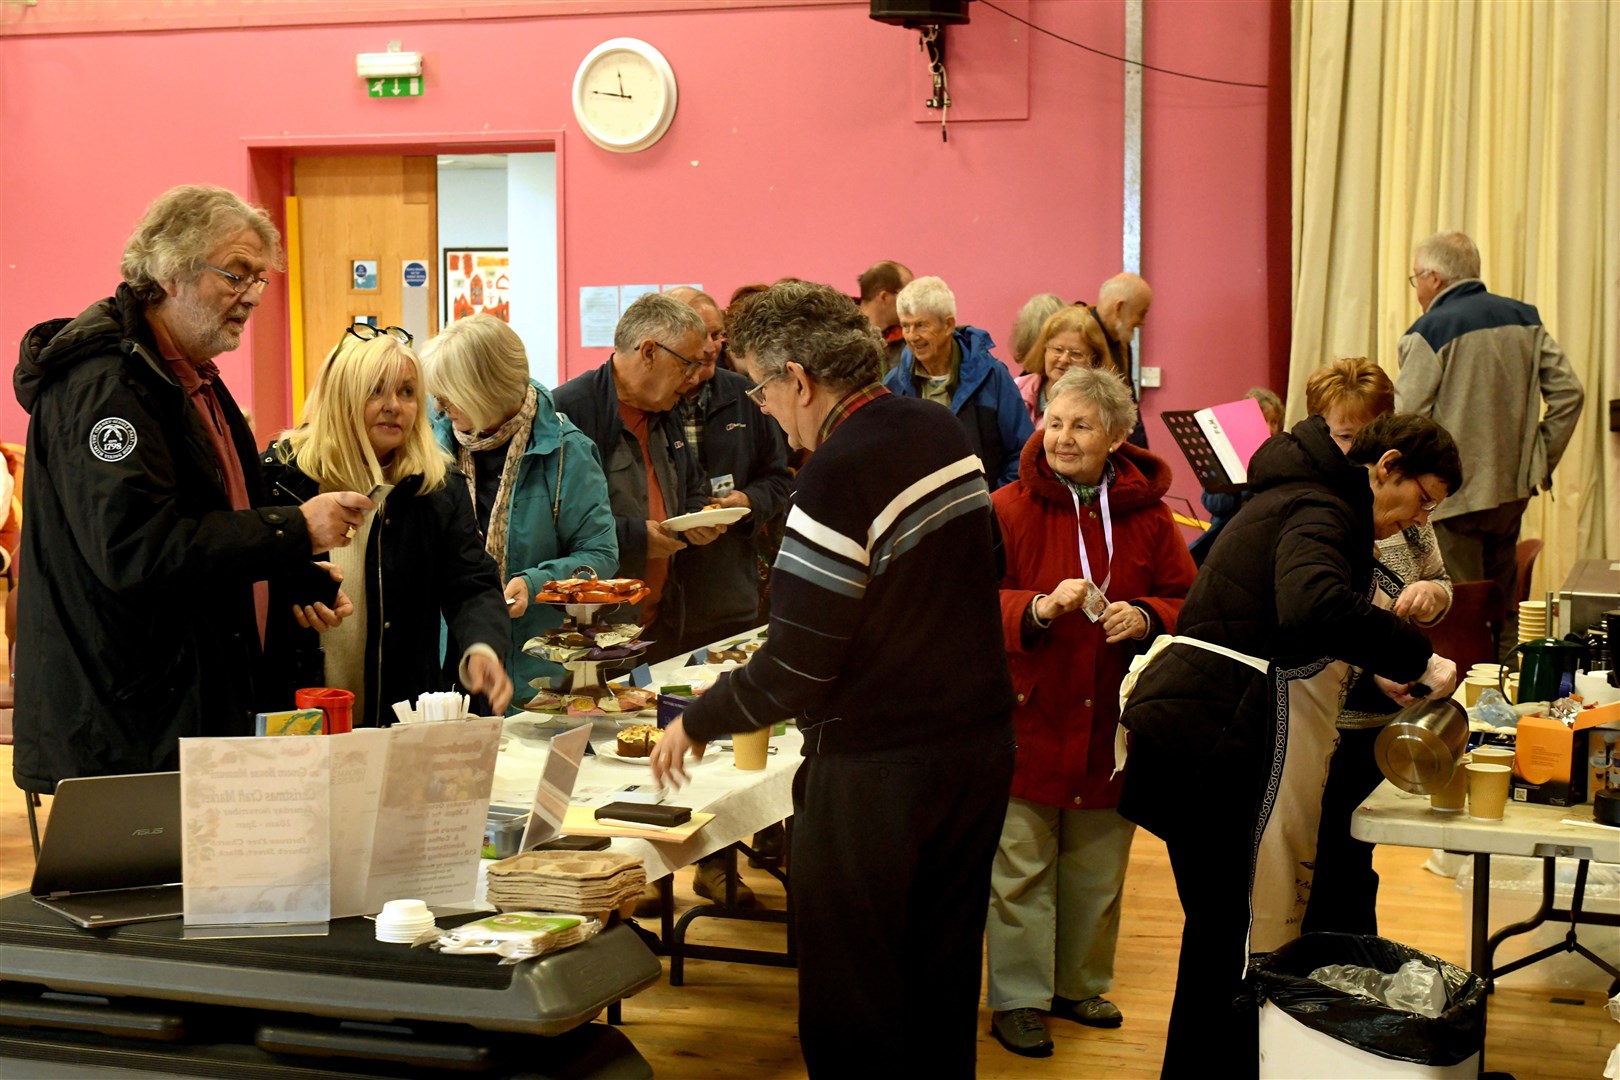 People queuing for food and tea. Picture: James Mackenzie.